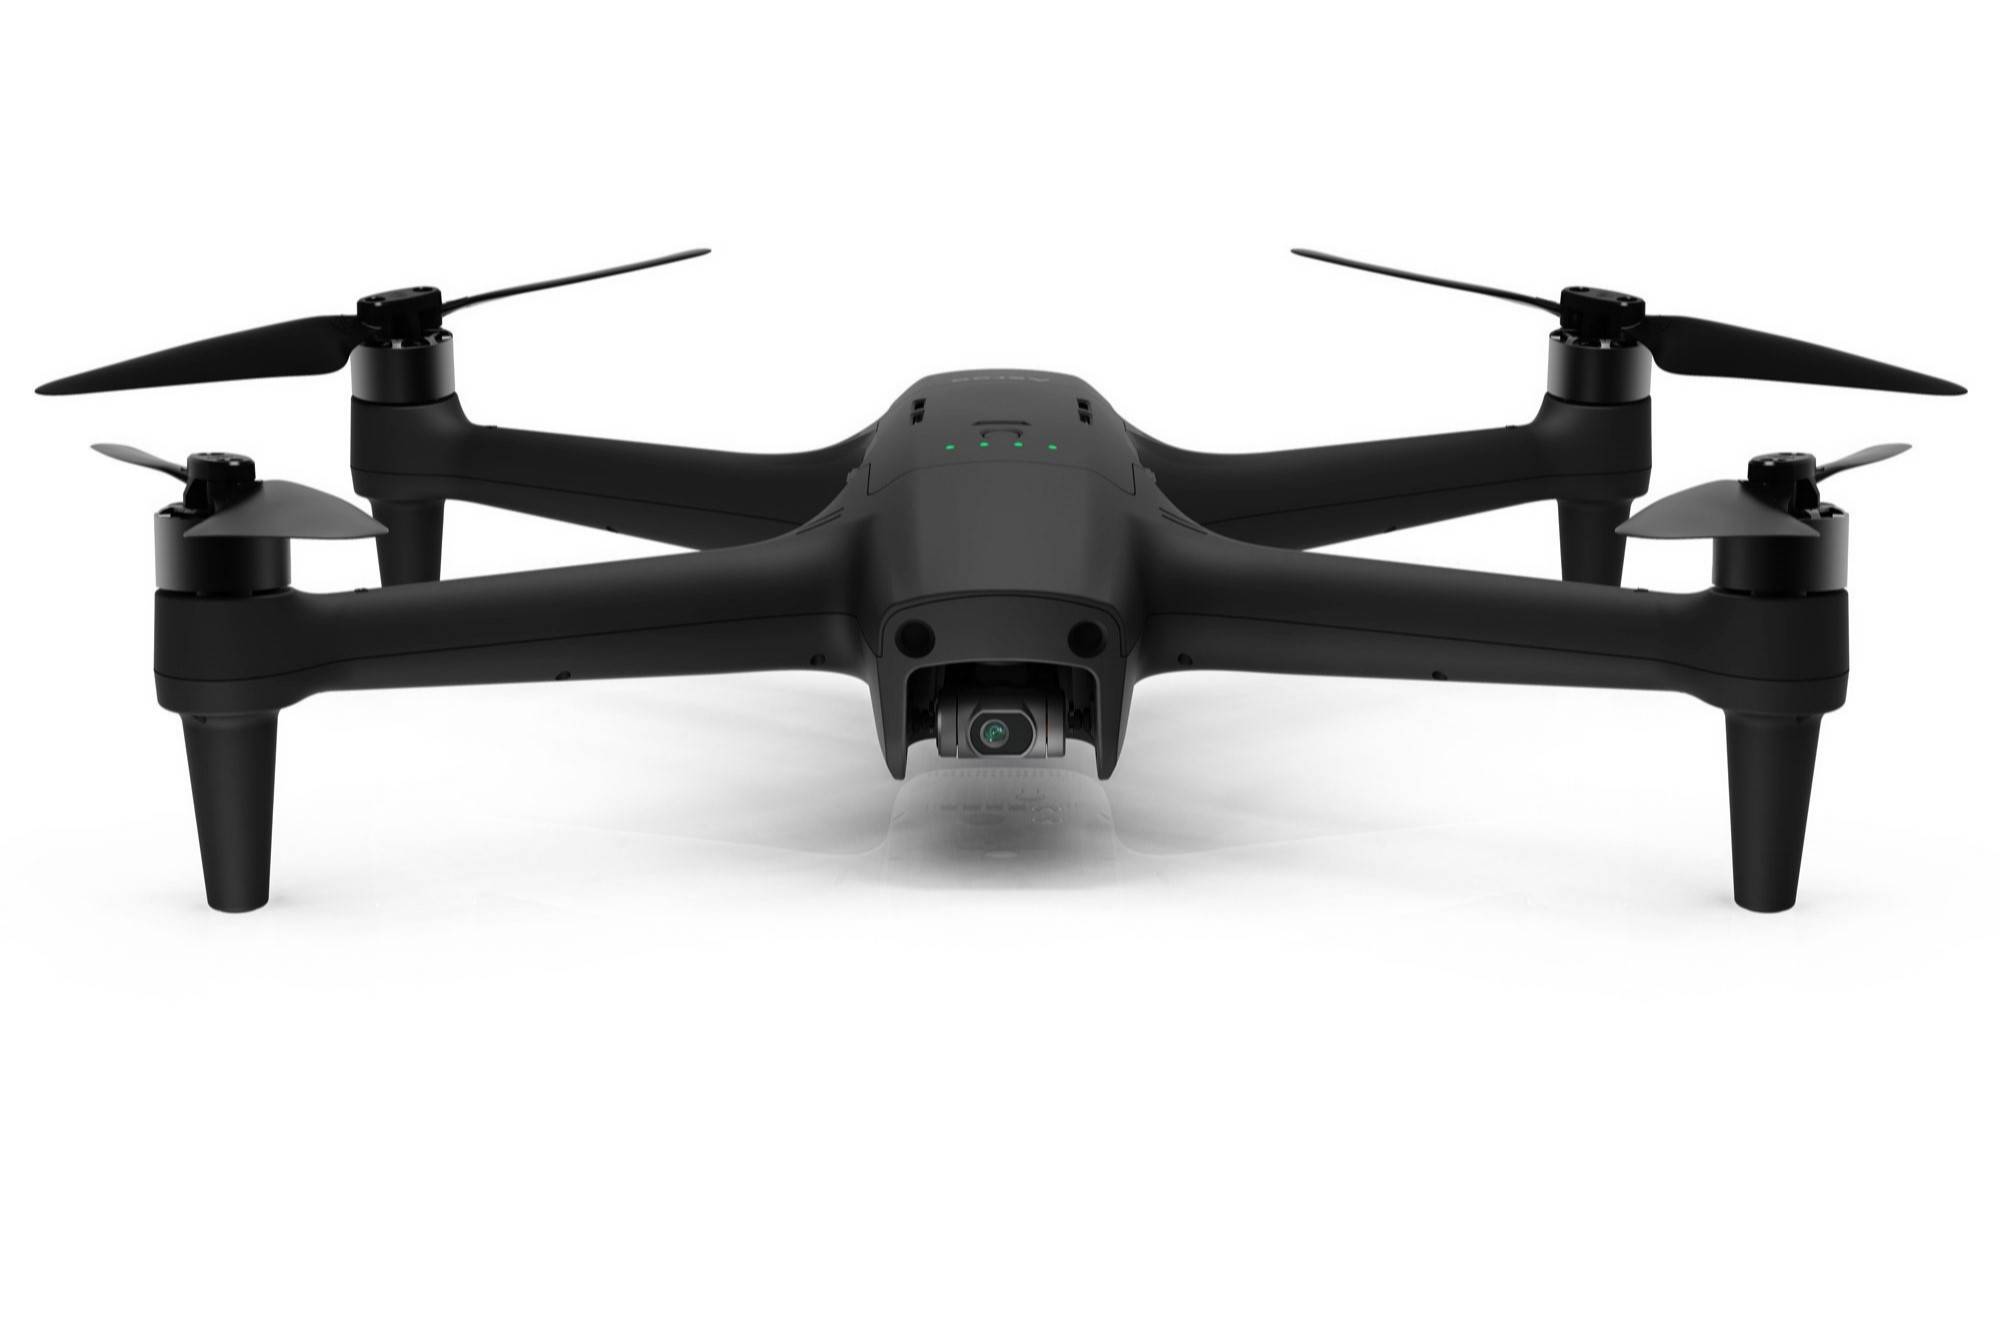 Aeroo Pro drone as seen from the front and slightly above.